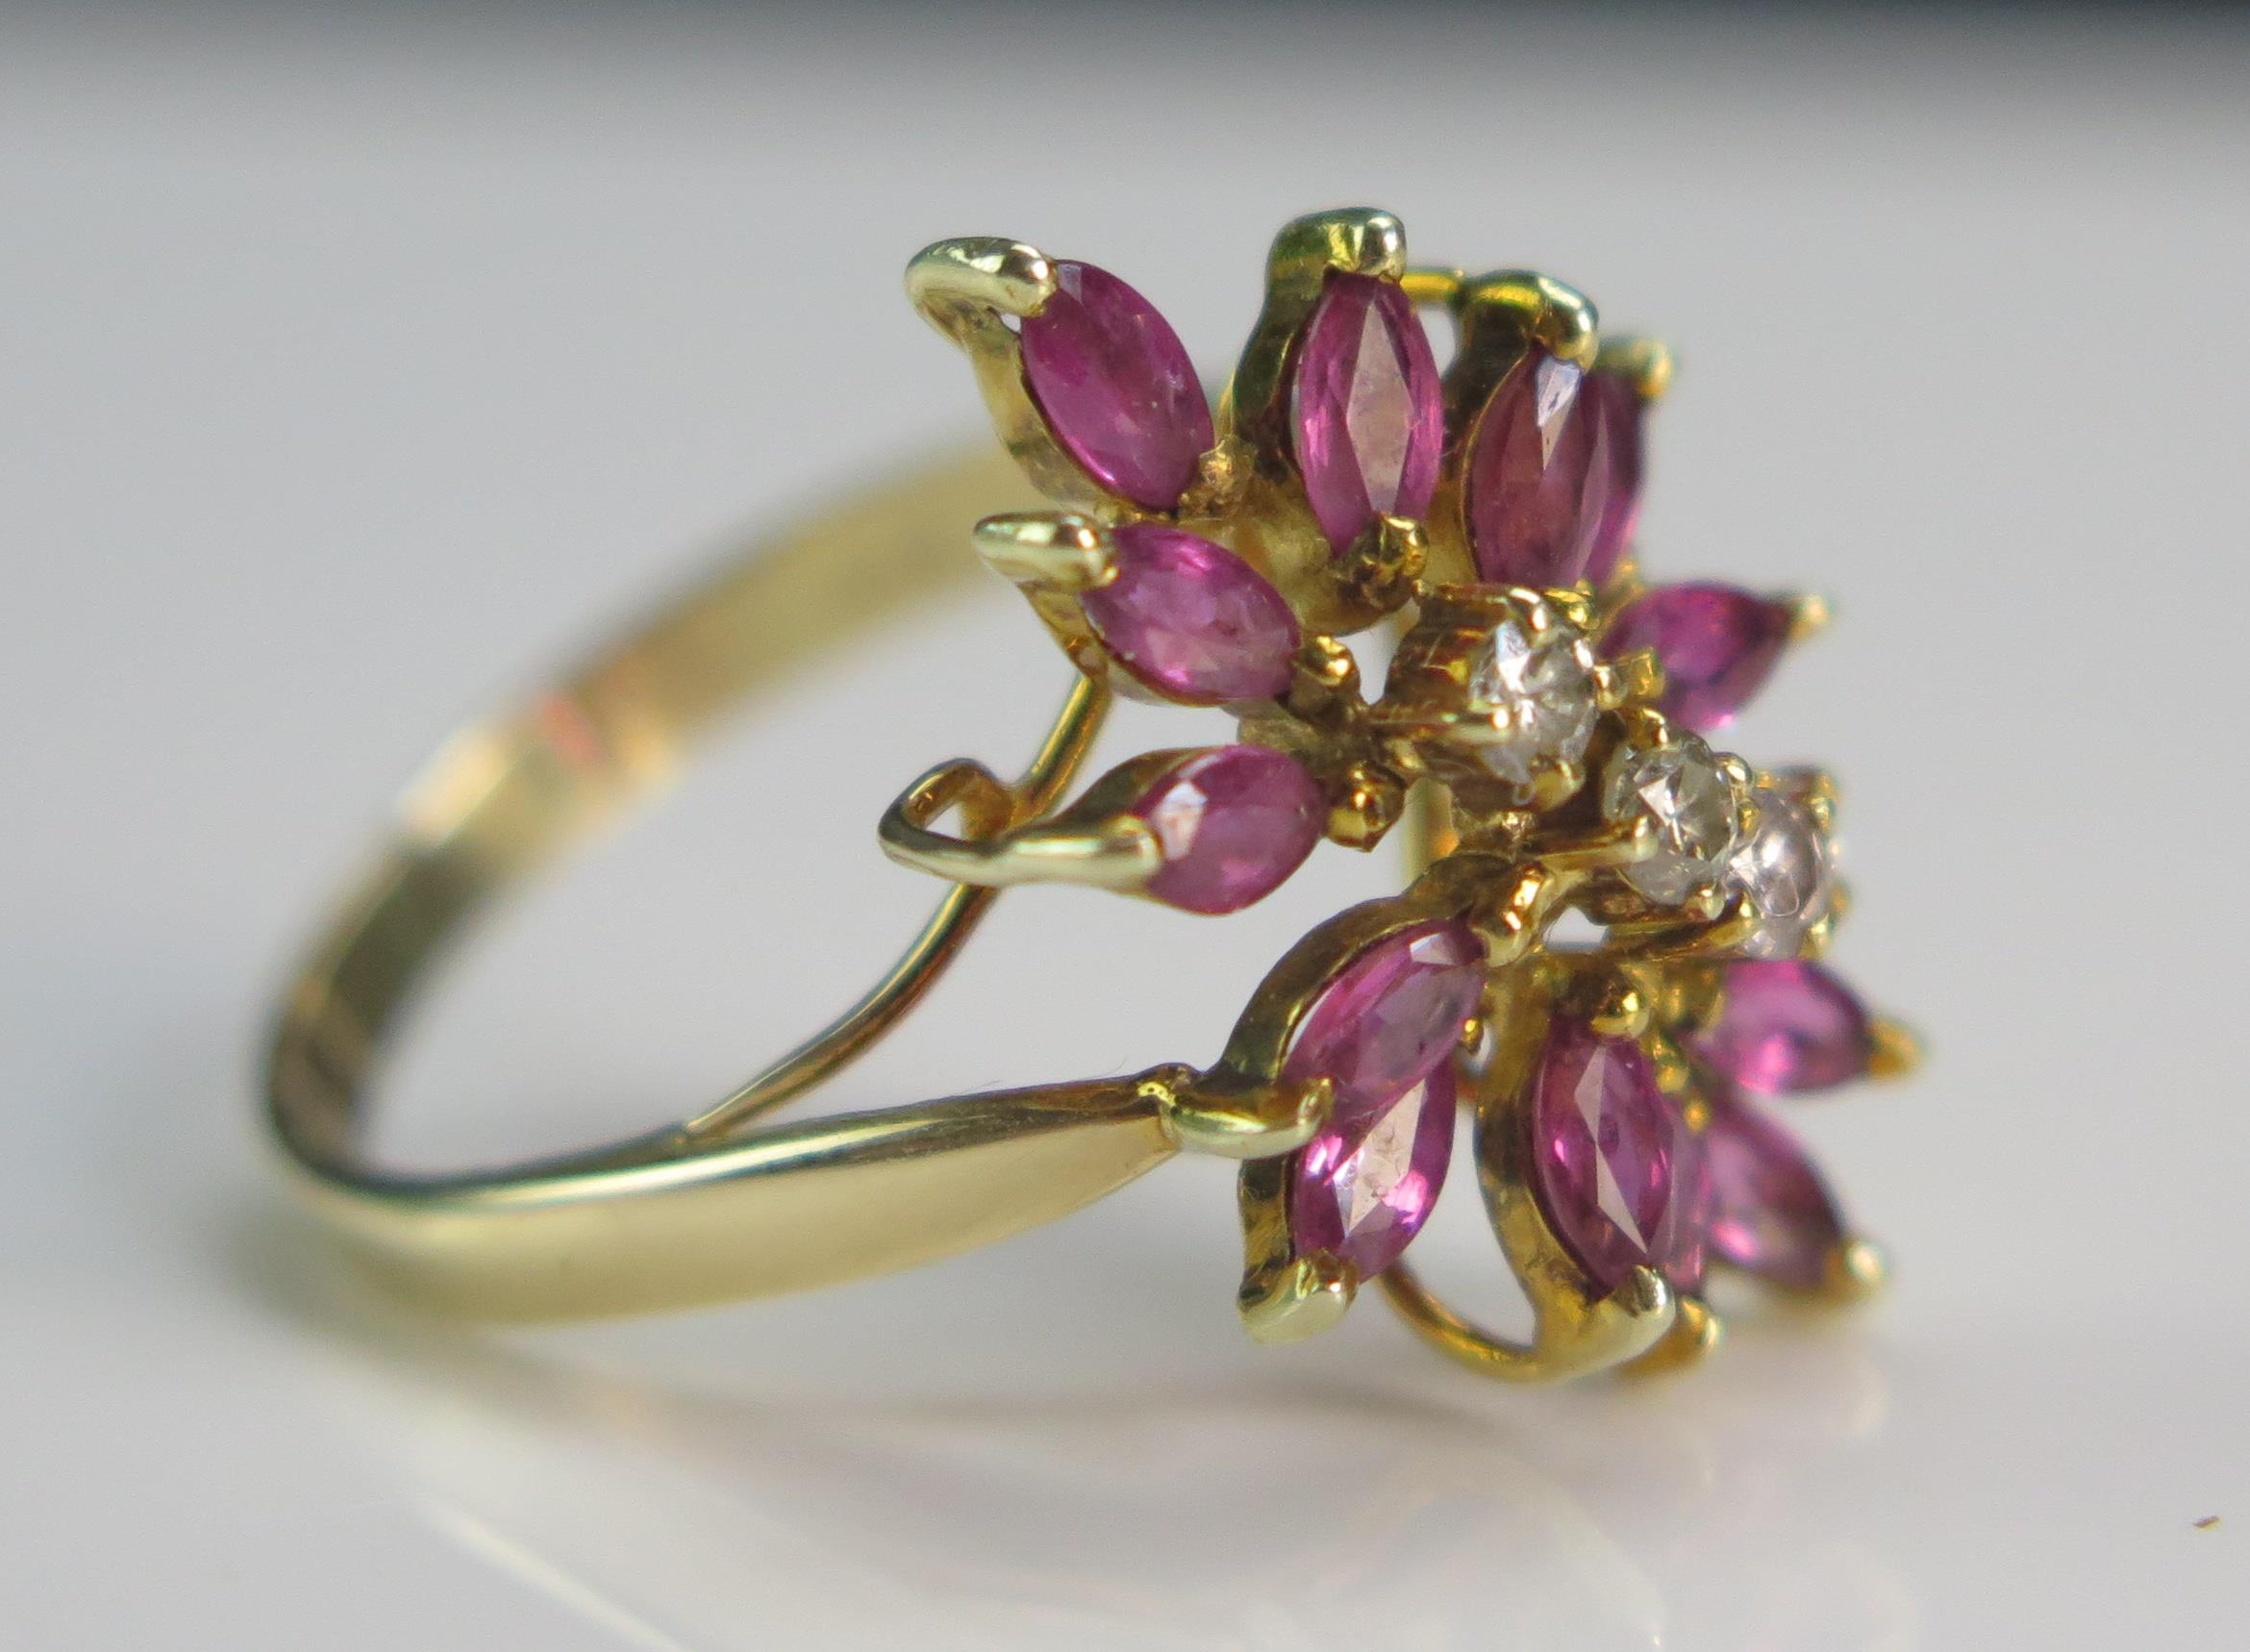 A 14K Gold, Ruby and Diamond Cluster Ring, 21x14.6mm head, sizeL.5, stamped 585 14K, 3.66g - Image 2 of 2